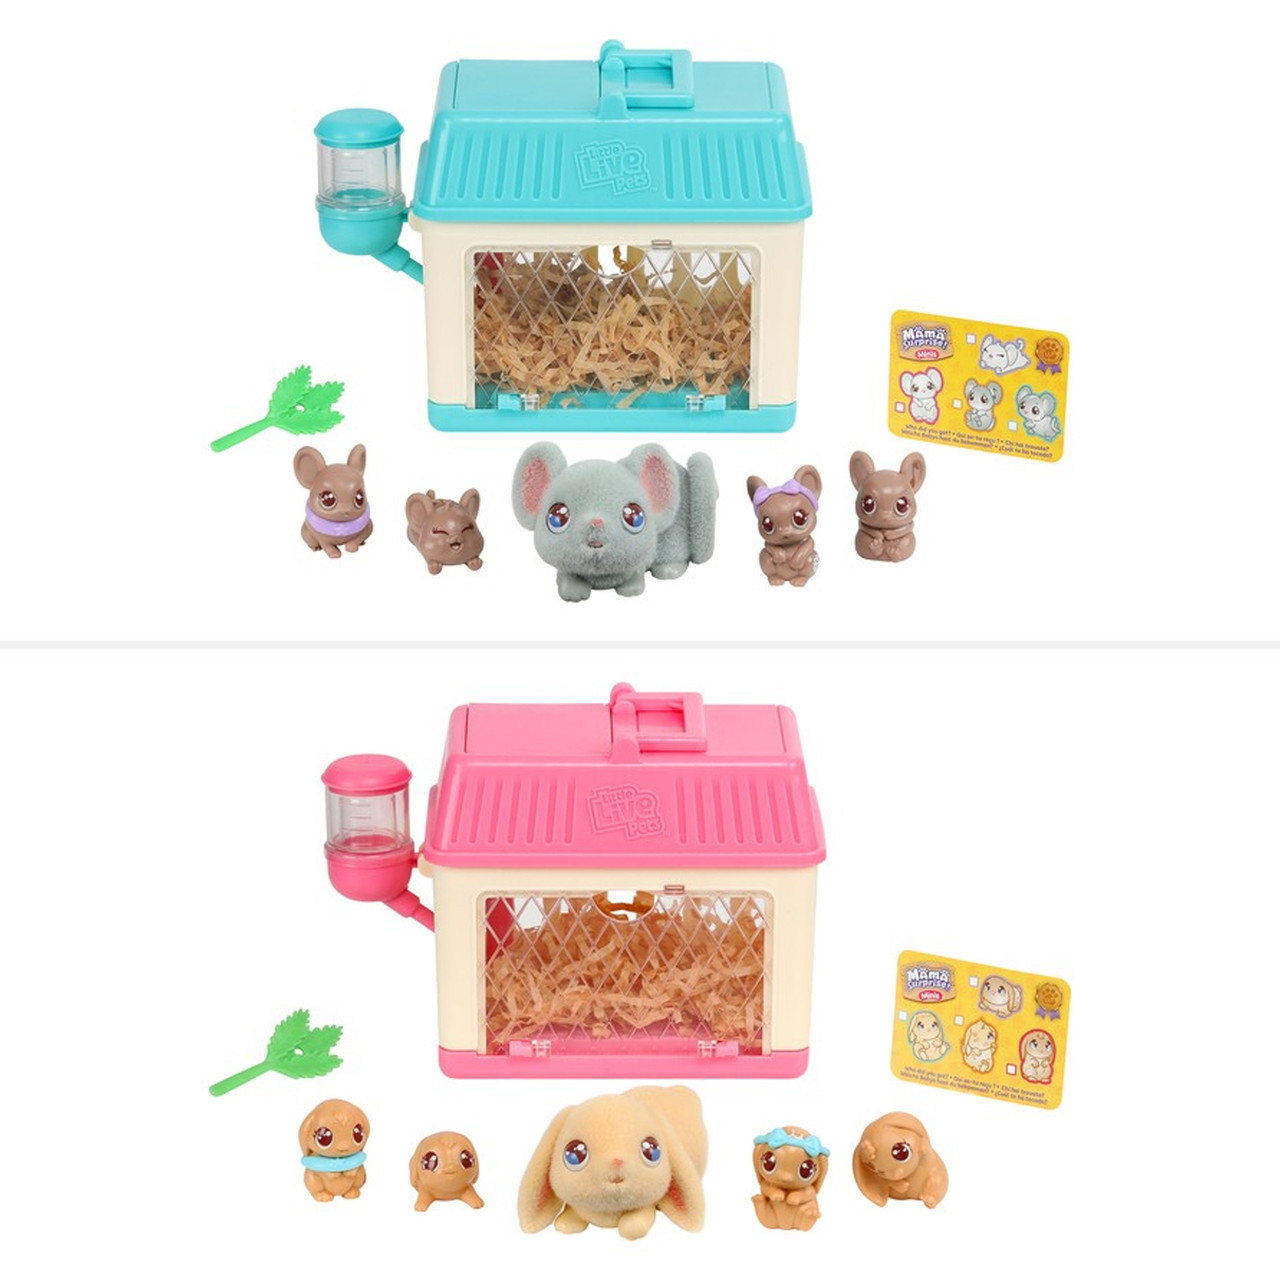 https://cdn11.bigcommerce.com/s-fh6ws/images/stencil/1280x1280/products/6181/26365/Little_Live_Pets_Mama_Surprise_Minis_Playset_Assorted_01__07482.1695692778.jpg?c=3